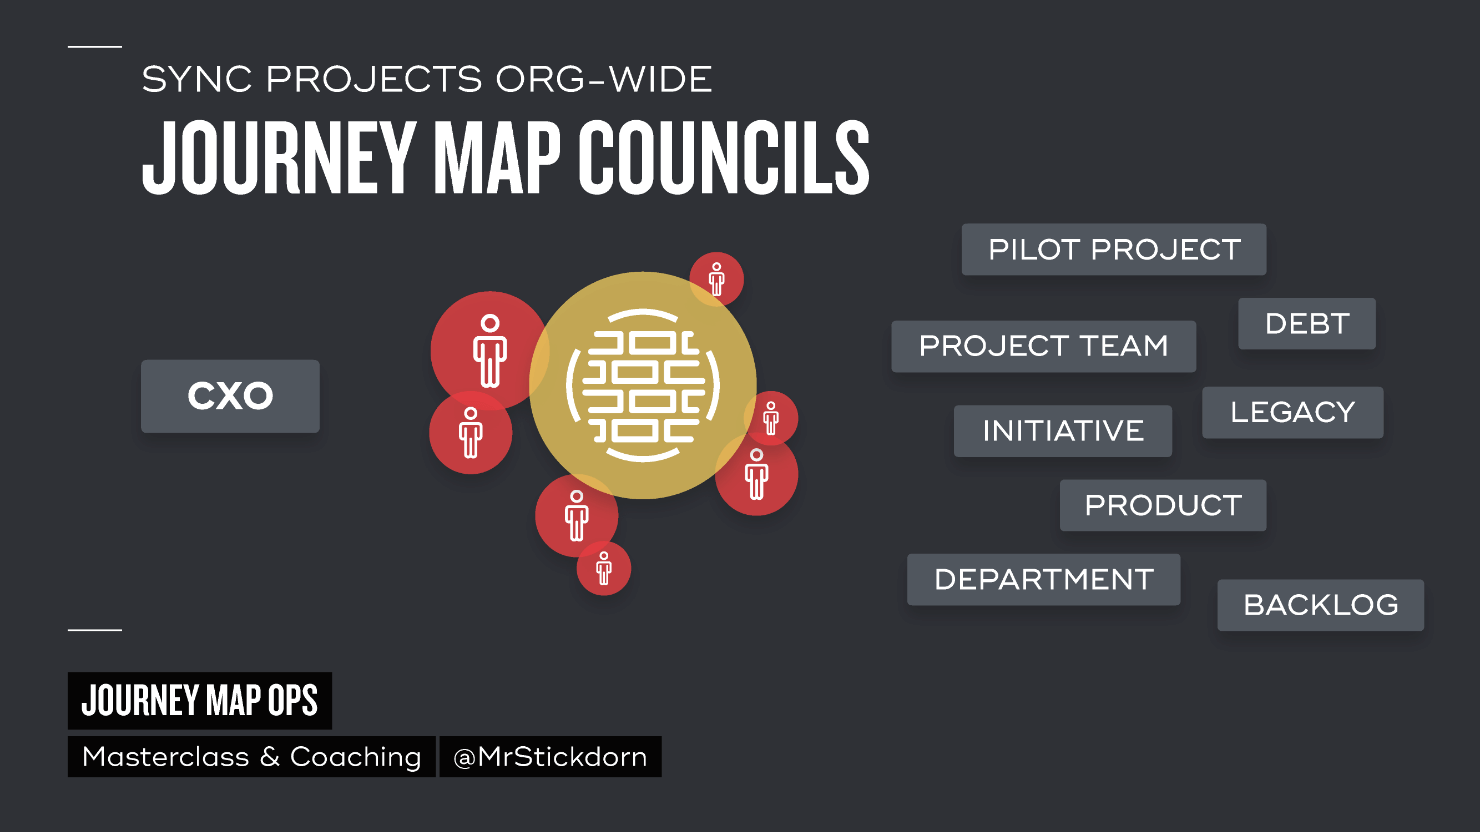 Marc Stickdorn氏の資料。ページタイトル：SYNC PROJECTS ORG-WIDE JOURNEY MAP COUNCILS. 「カスタマージャーニー・マネージャー」という存在が必要であることと、その管理すべき対象と役割を表す単語が並べられている。単語は以下の通り。PILOT PROJECT, PROJECT TEAM, DEBT, INITIATIVE, LEGACY, PRODUCT, DEPARTMENT, BACKLOG.